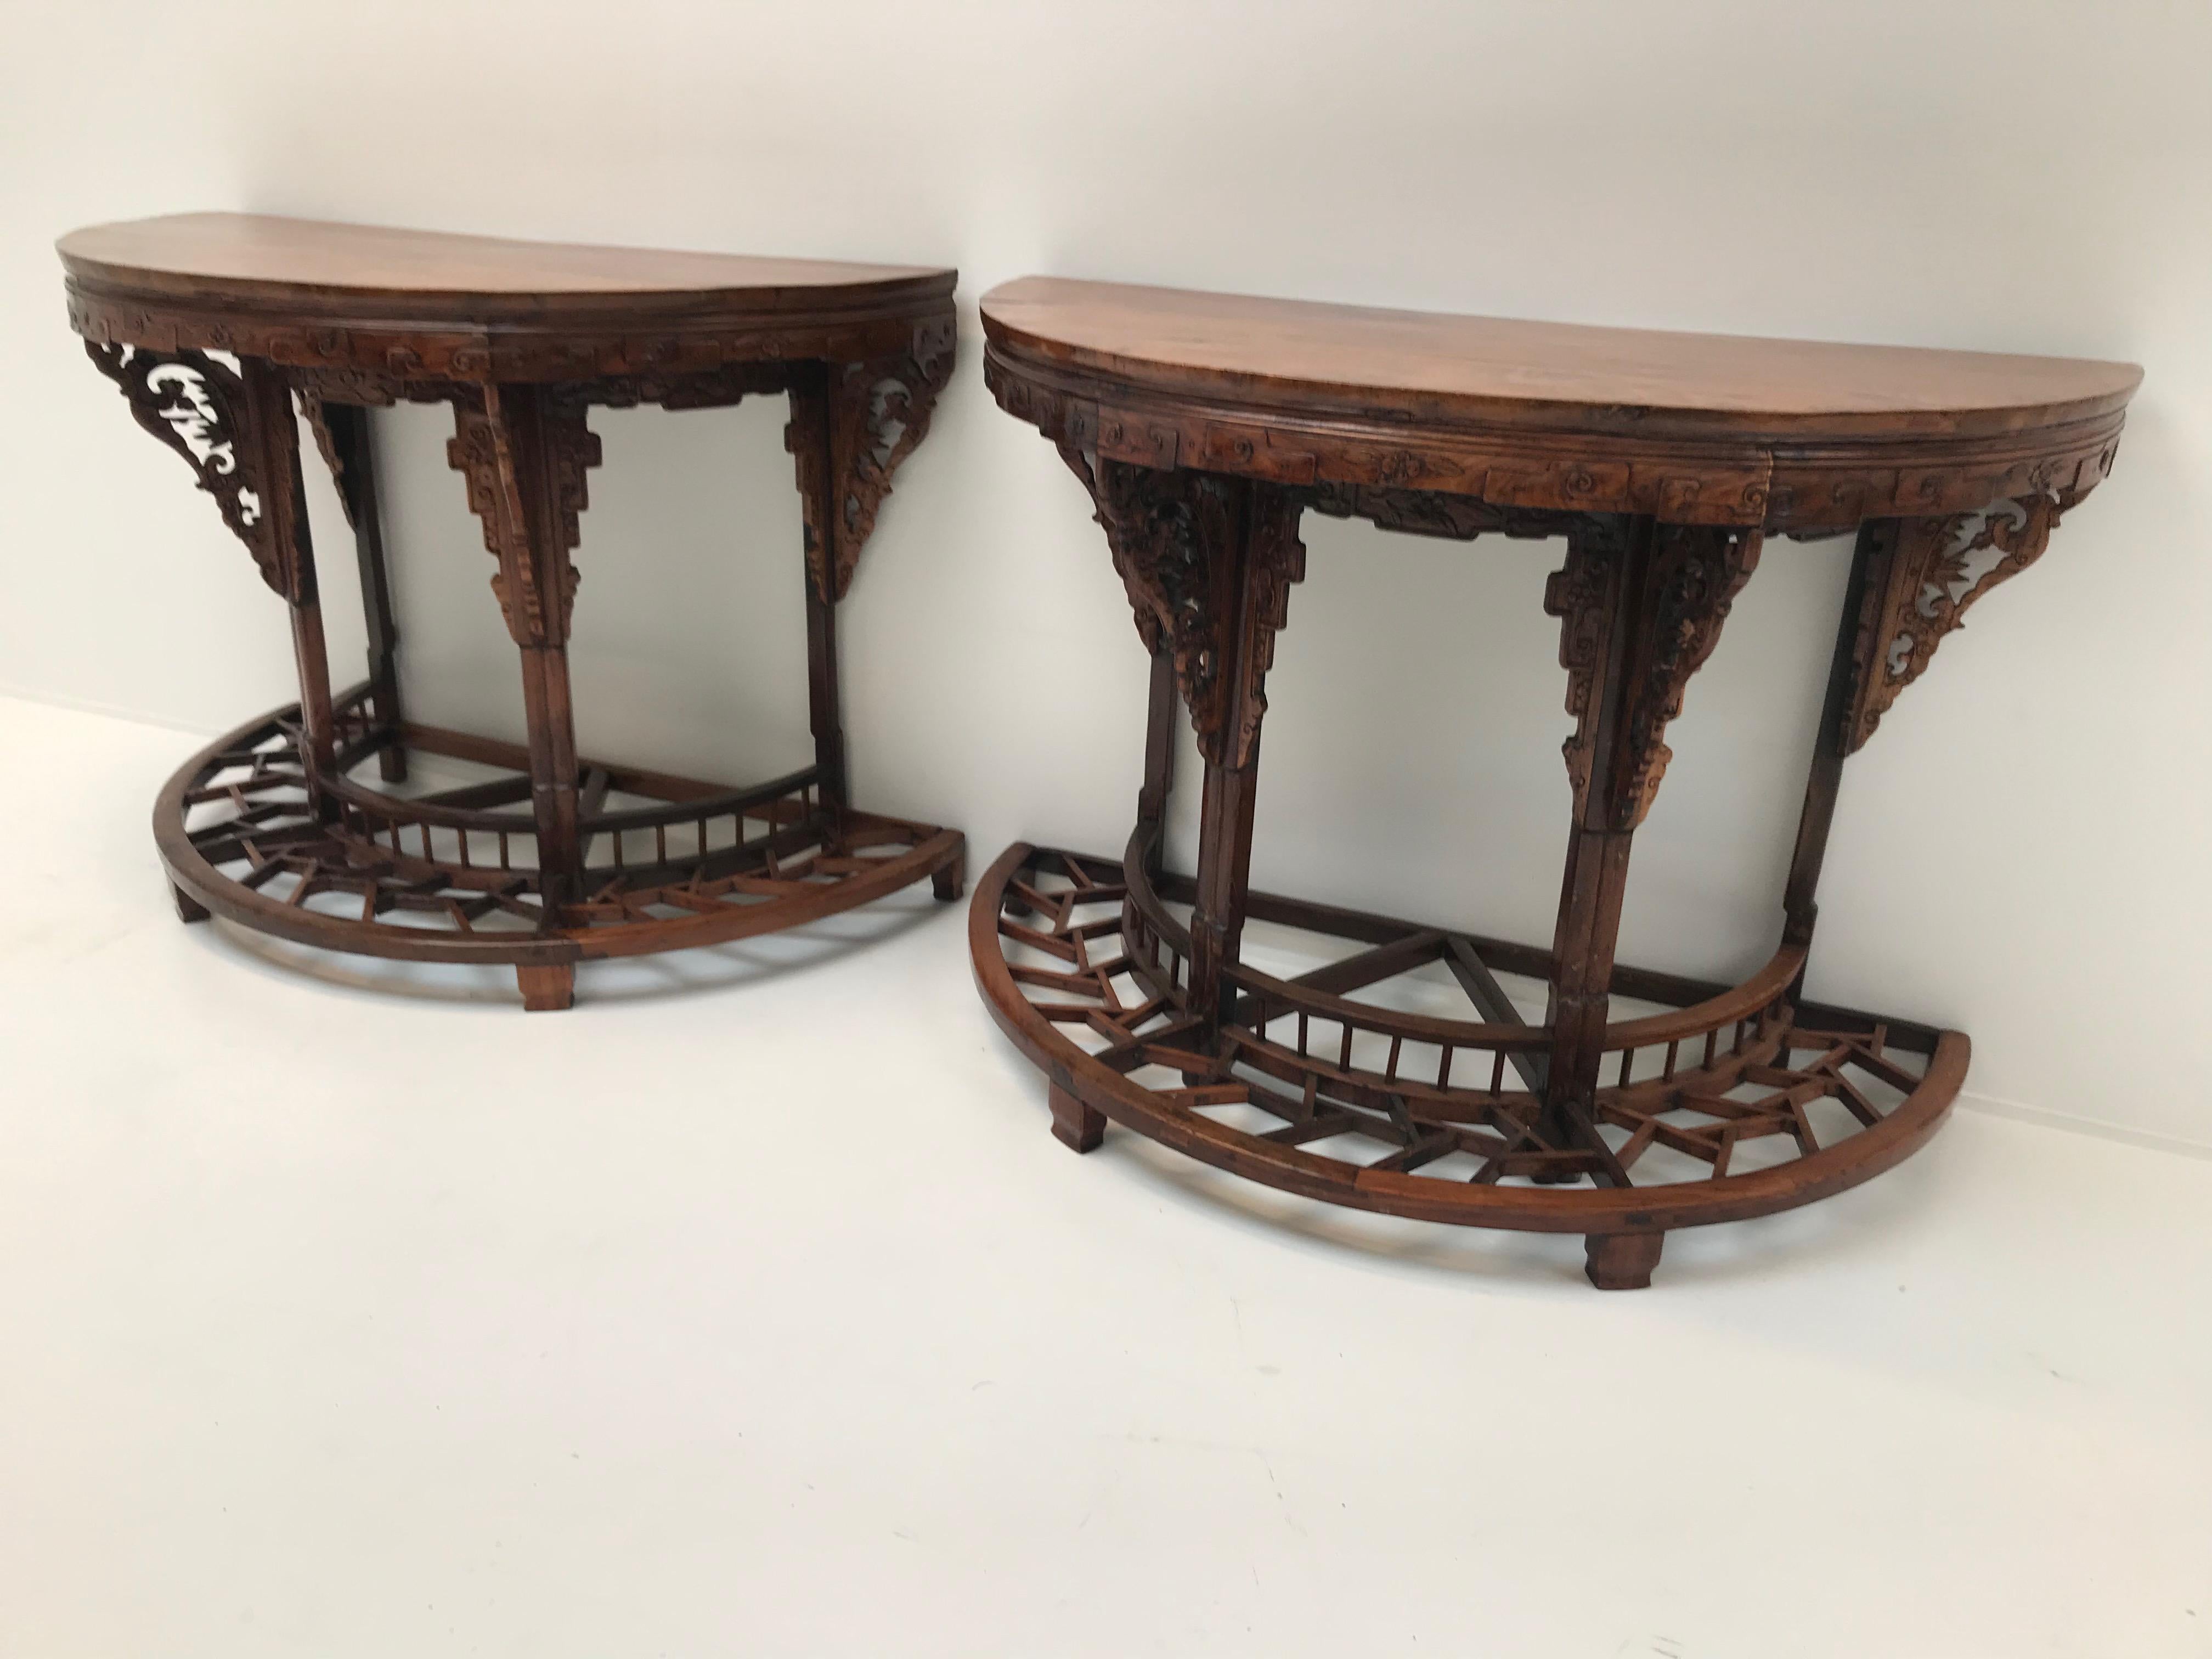 Exceptional pair of Chinese consoles in elmwood
Can also be combined as a round table
Very nice carved work
Nice as consoles but as well as a center table.
 